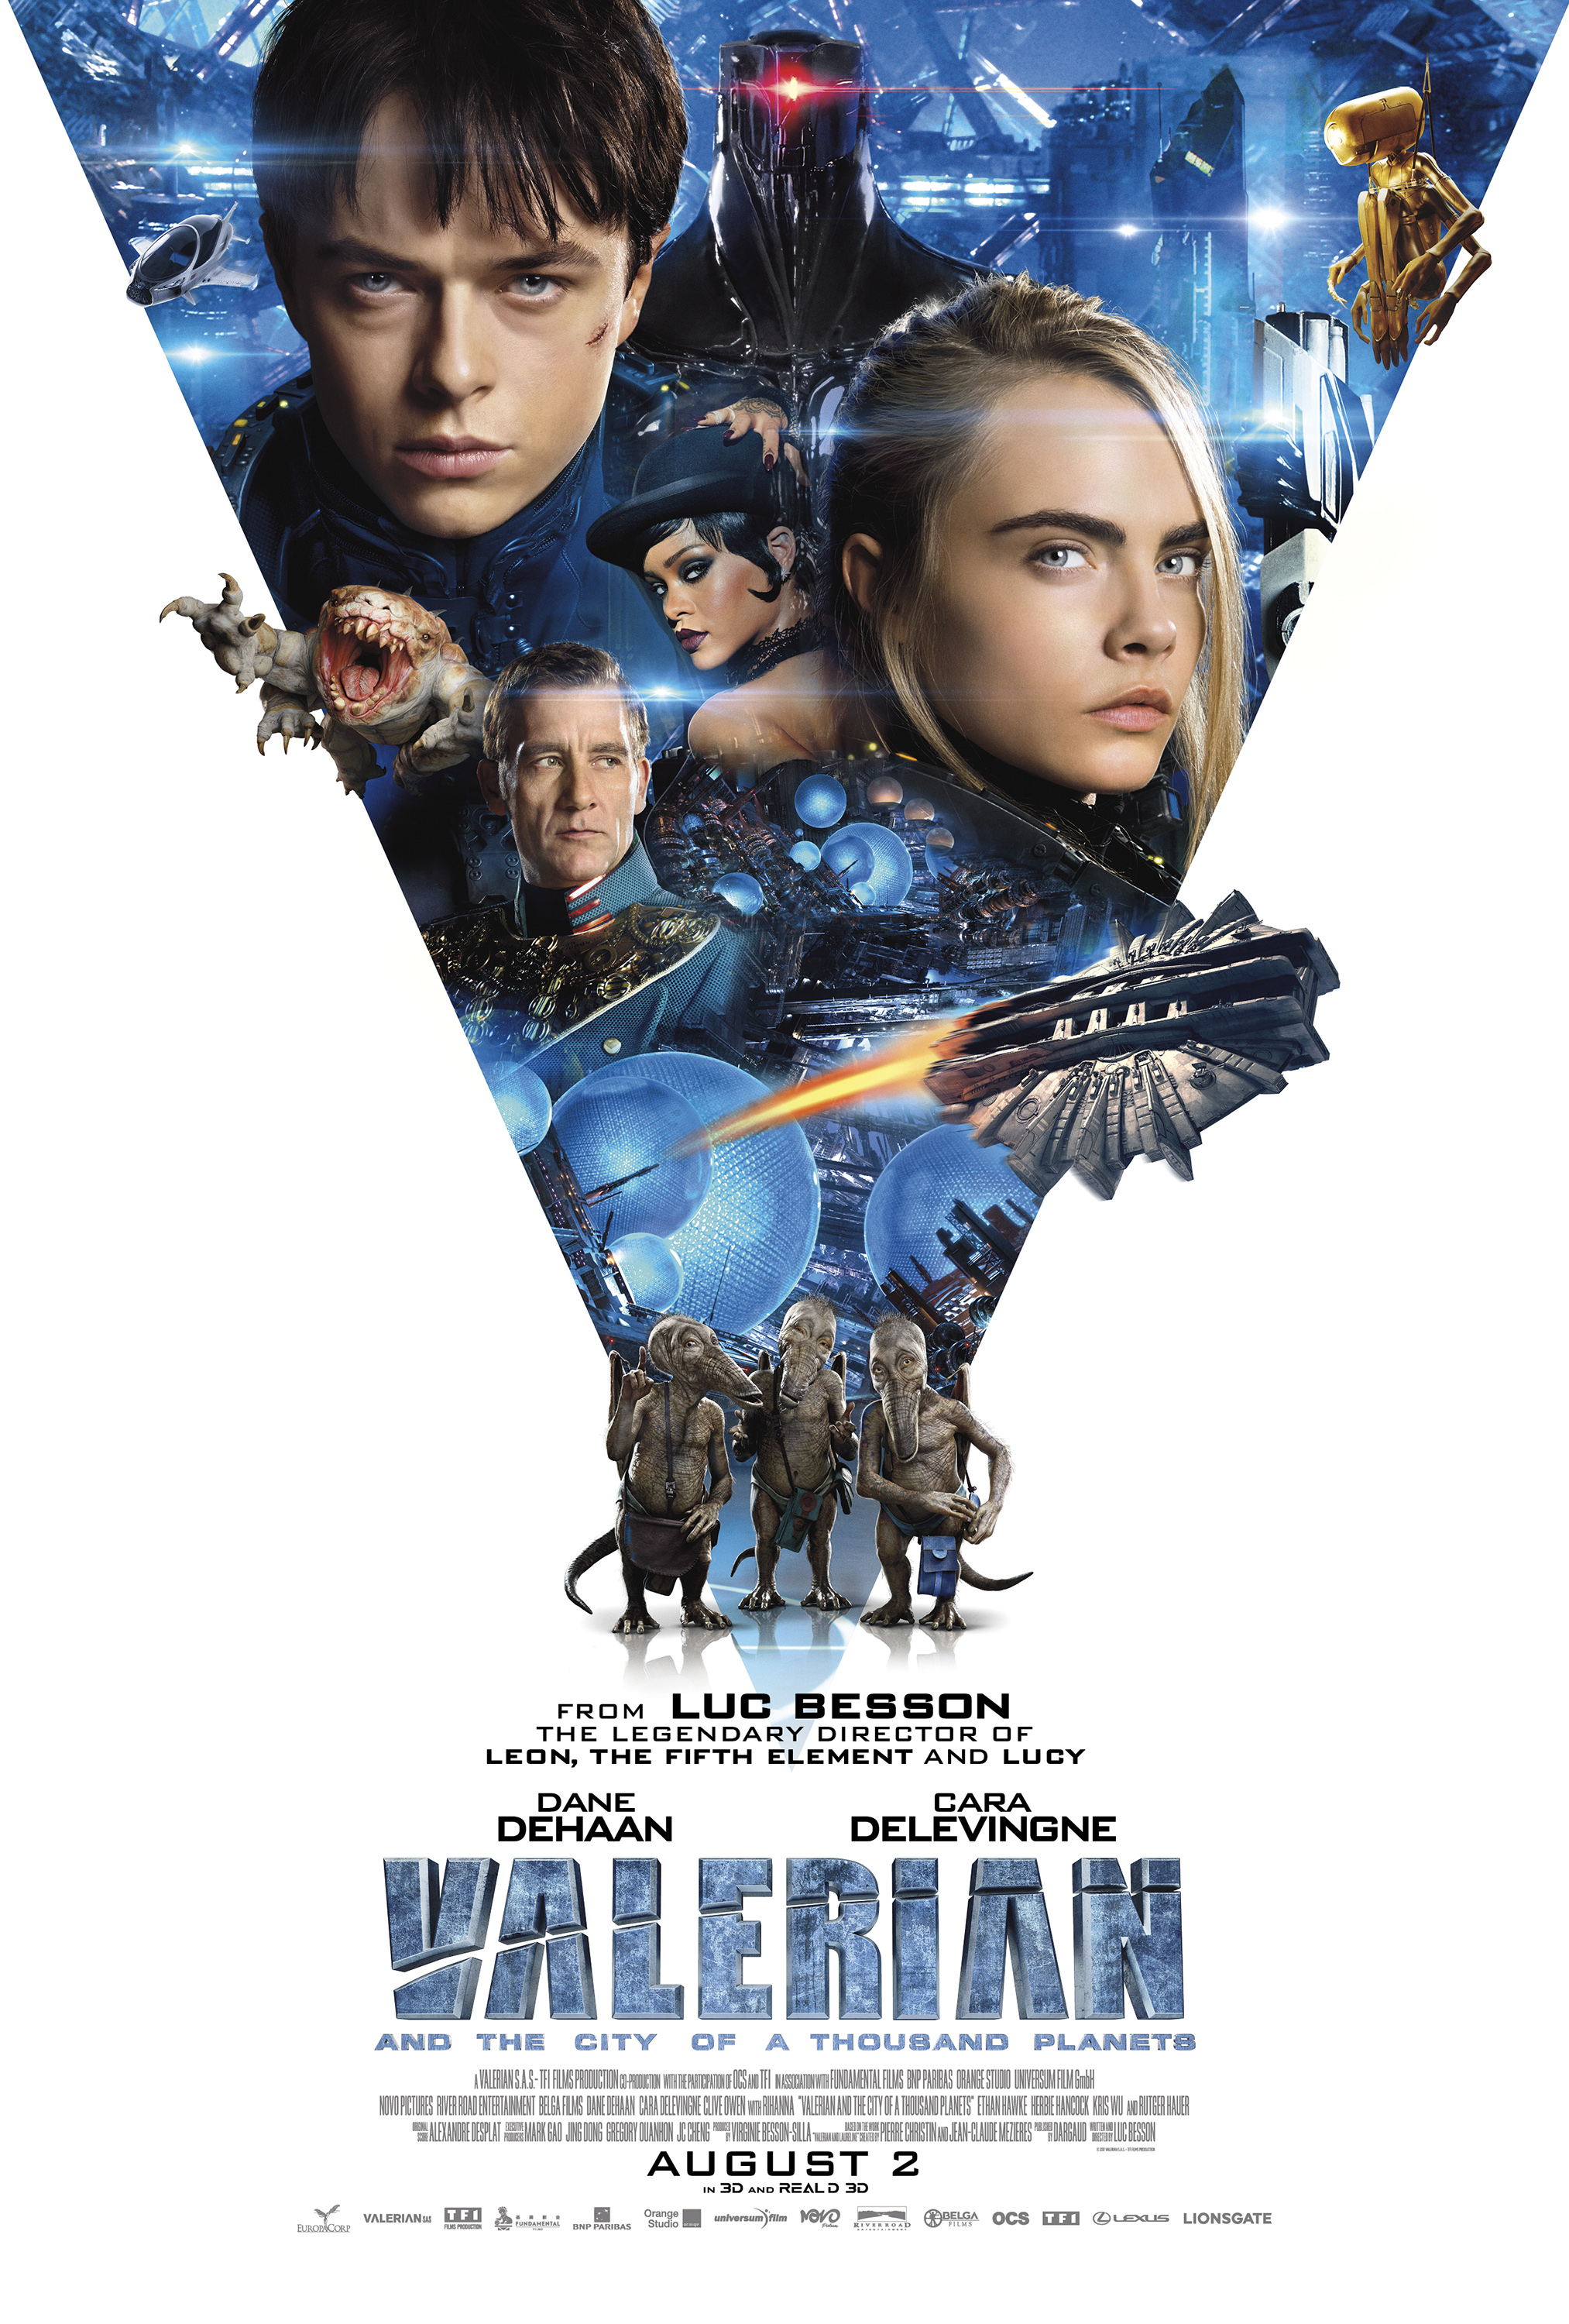 Valerian And The City Of A Thousand Planets film review – more than meets the eye?